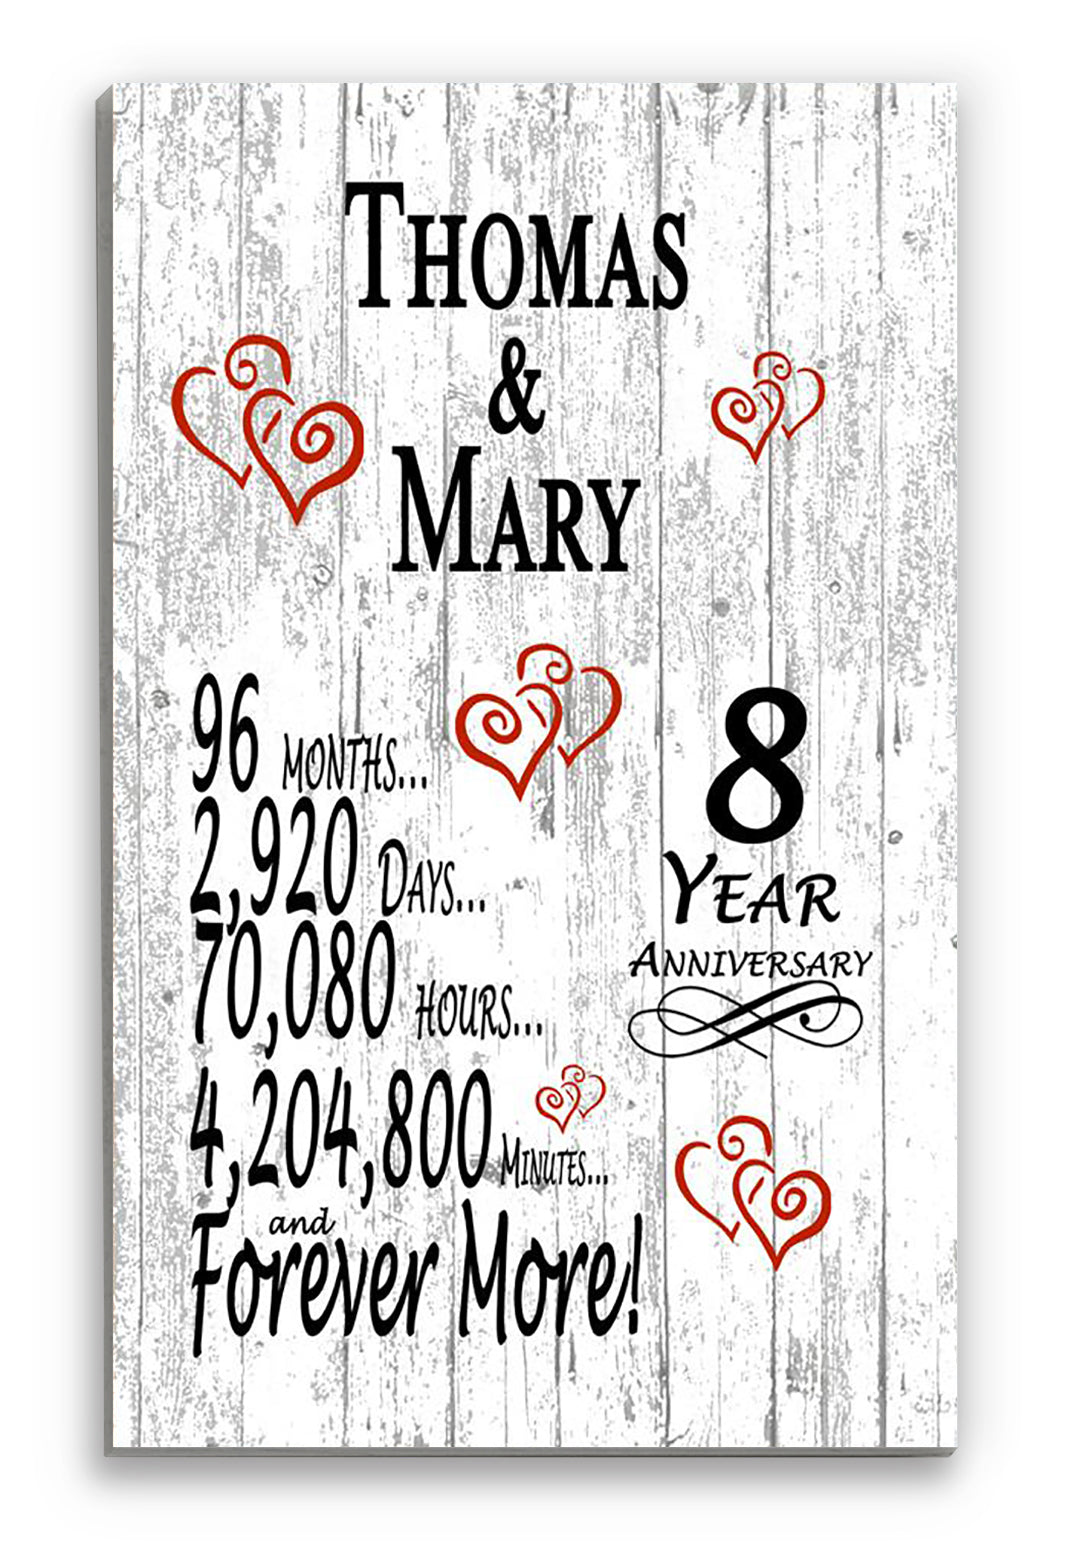 Amazon.com: 8th Anniversary Print, 8 years anniversary gift for him, 8th  anniversary for gift for her, Electric anniversary gift, Personalize  Anniversary Burlap Print (Frame Not Included) : Handmade Products